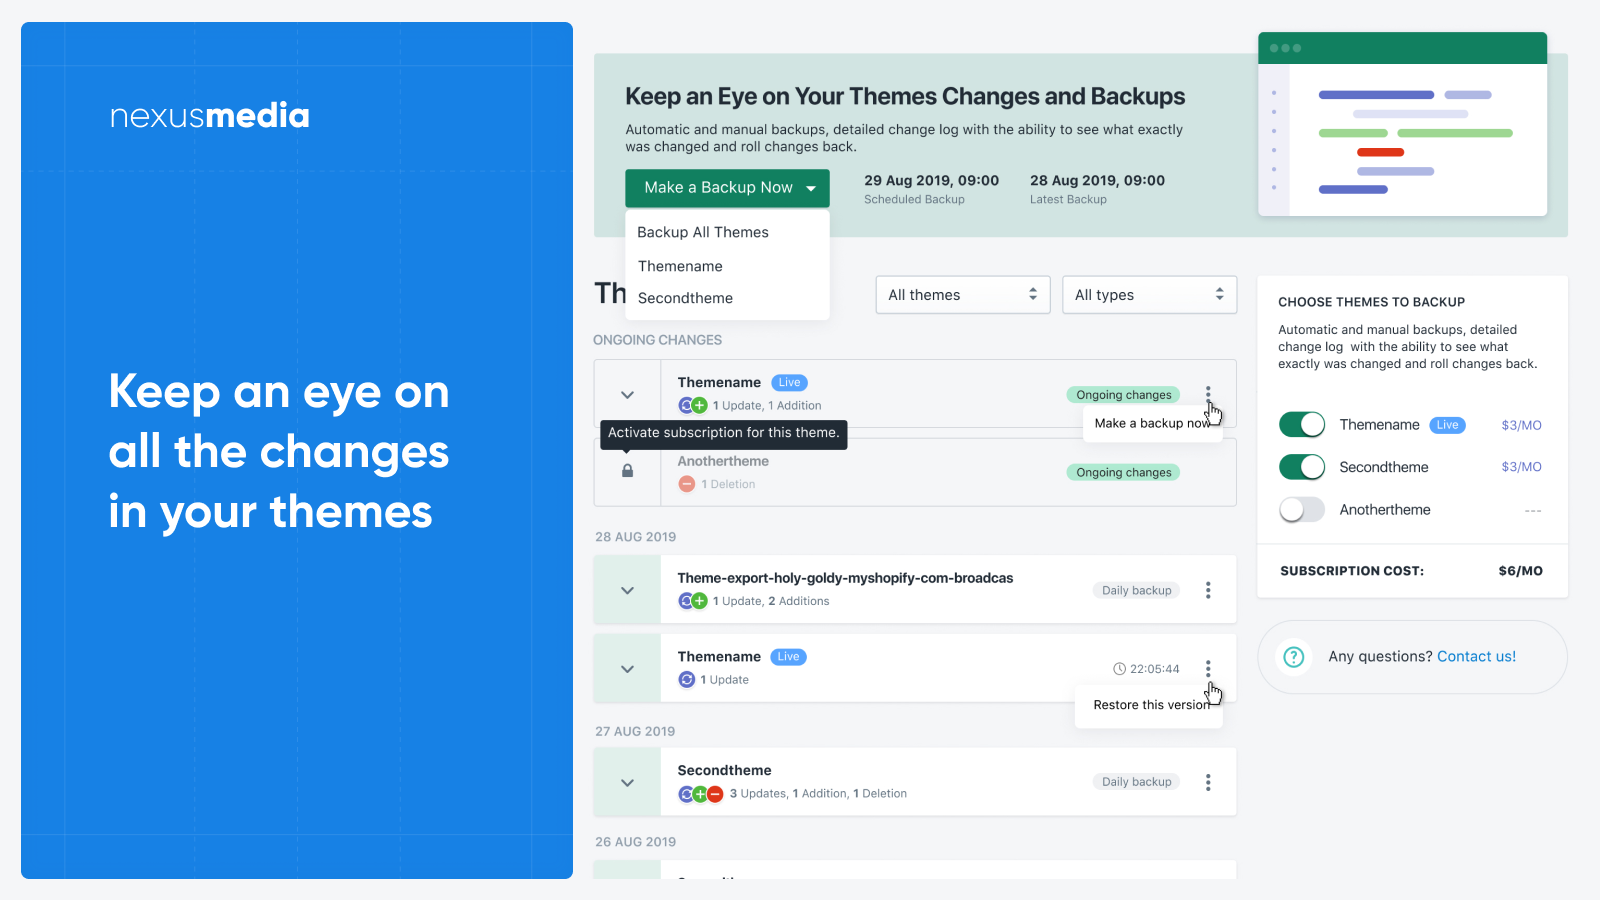 Keep an eye on all the changes in your theme, automatic backups